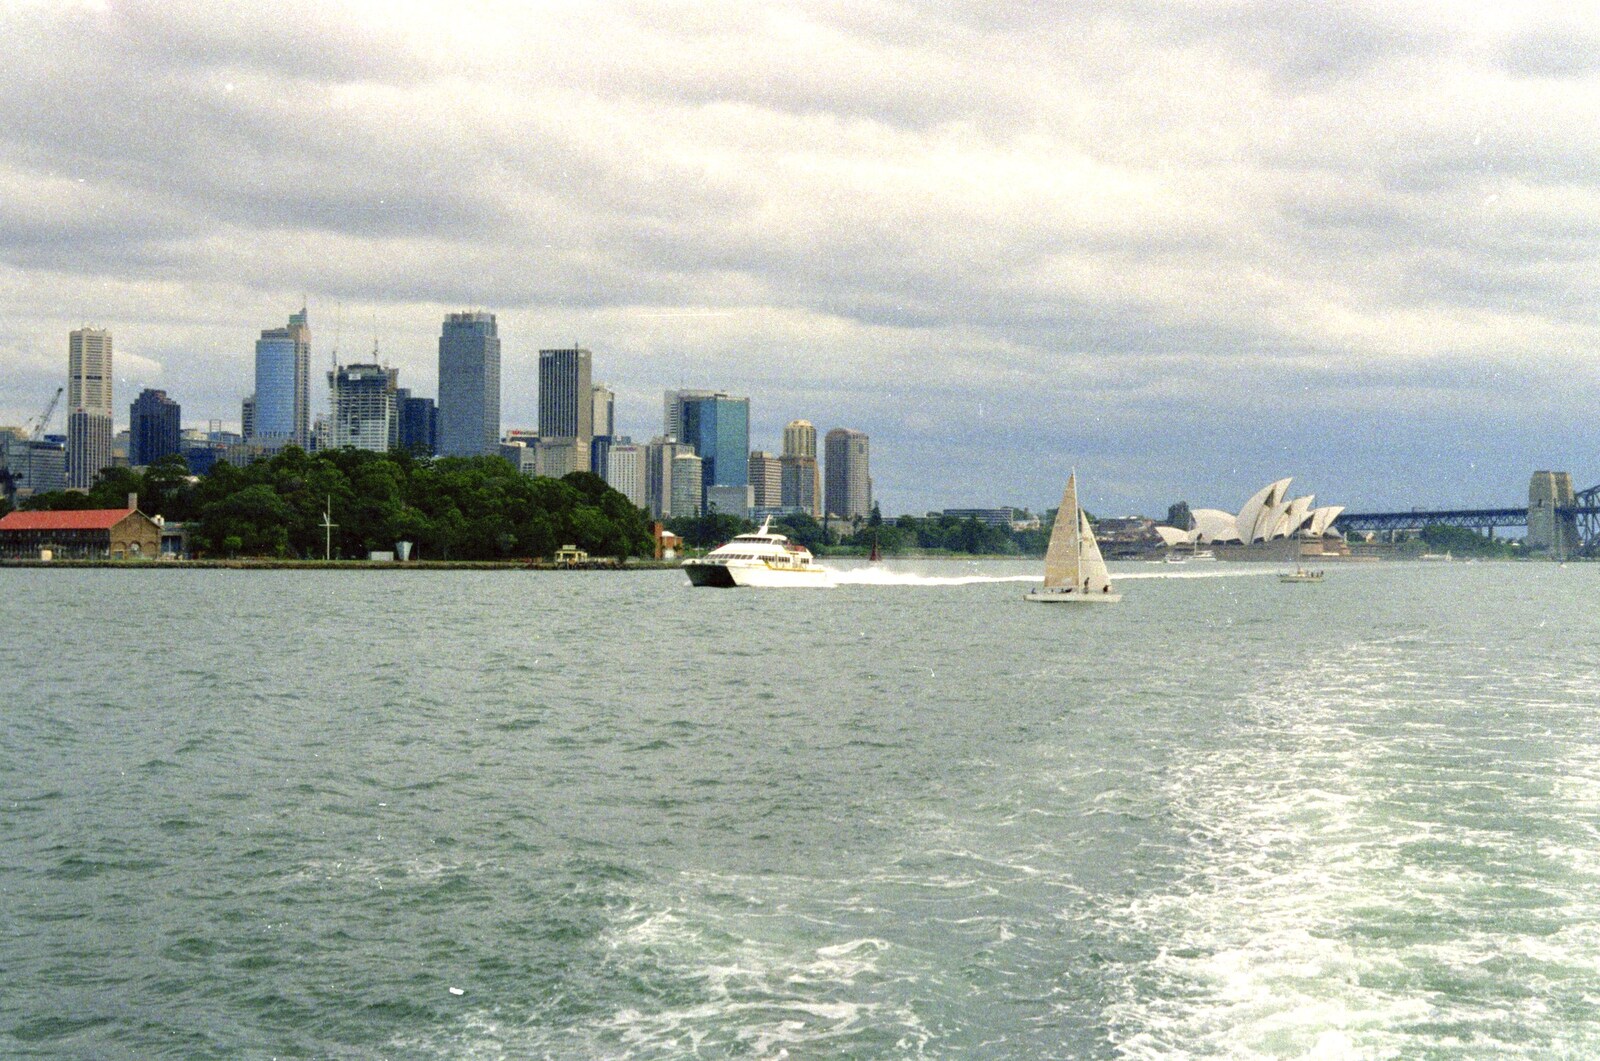 A catermeran speeds out of the harbour from A Trip to the Zoo, Sydney, Australia - 7th April 2000